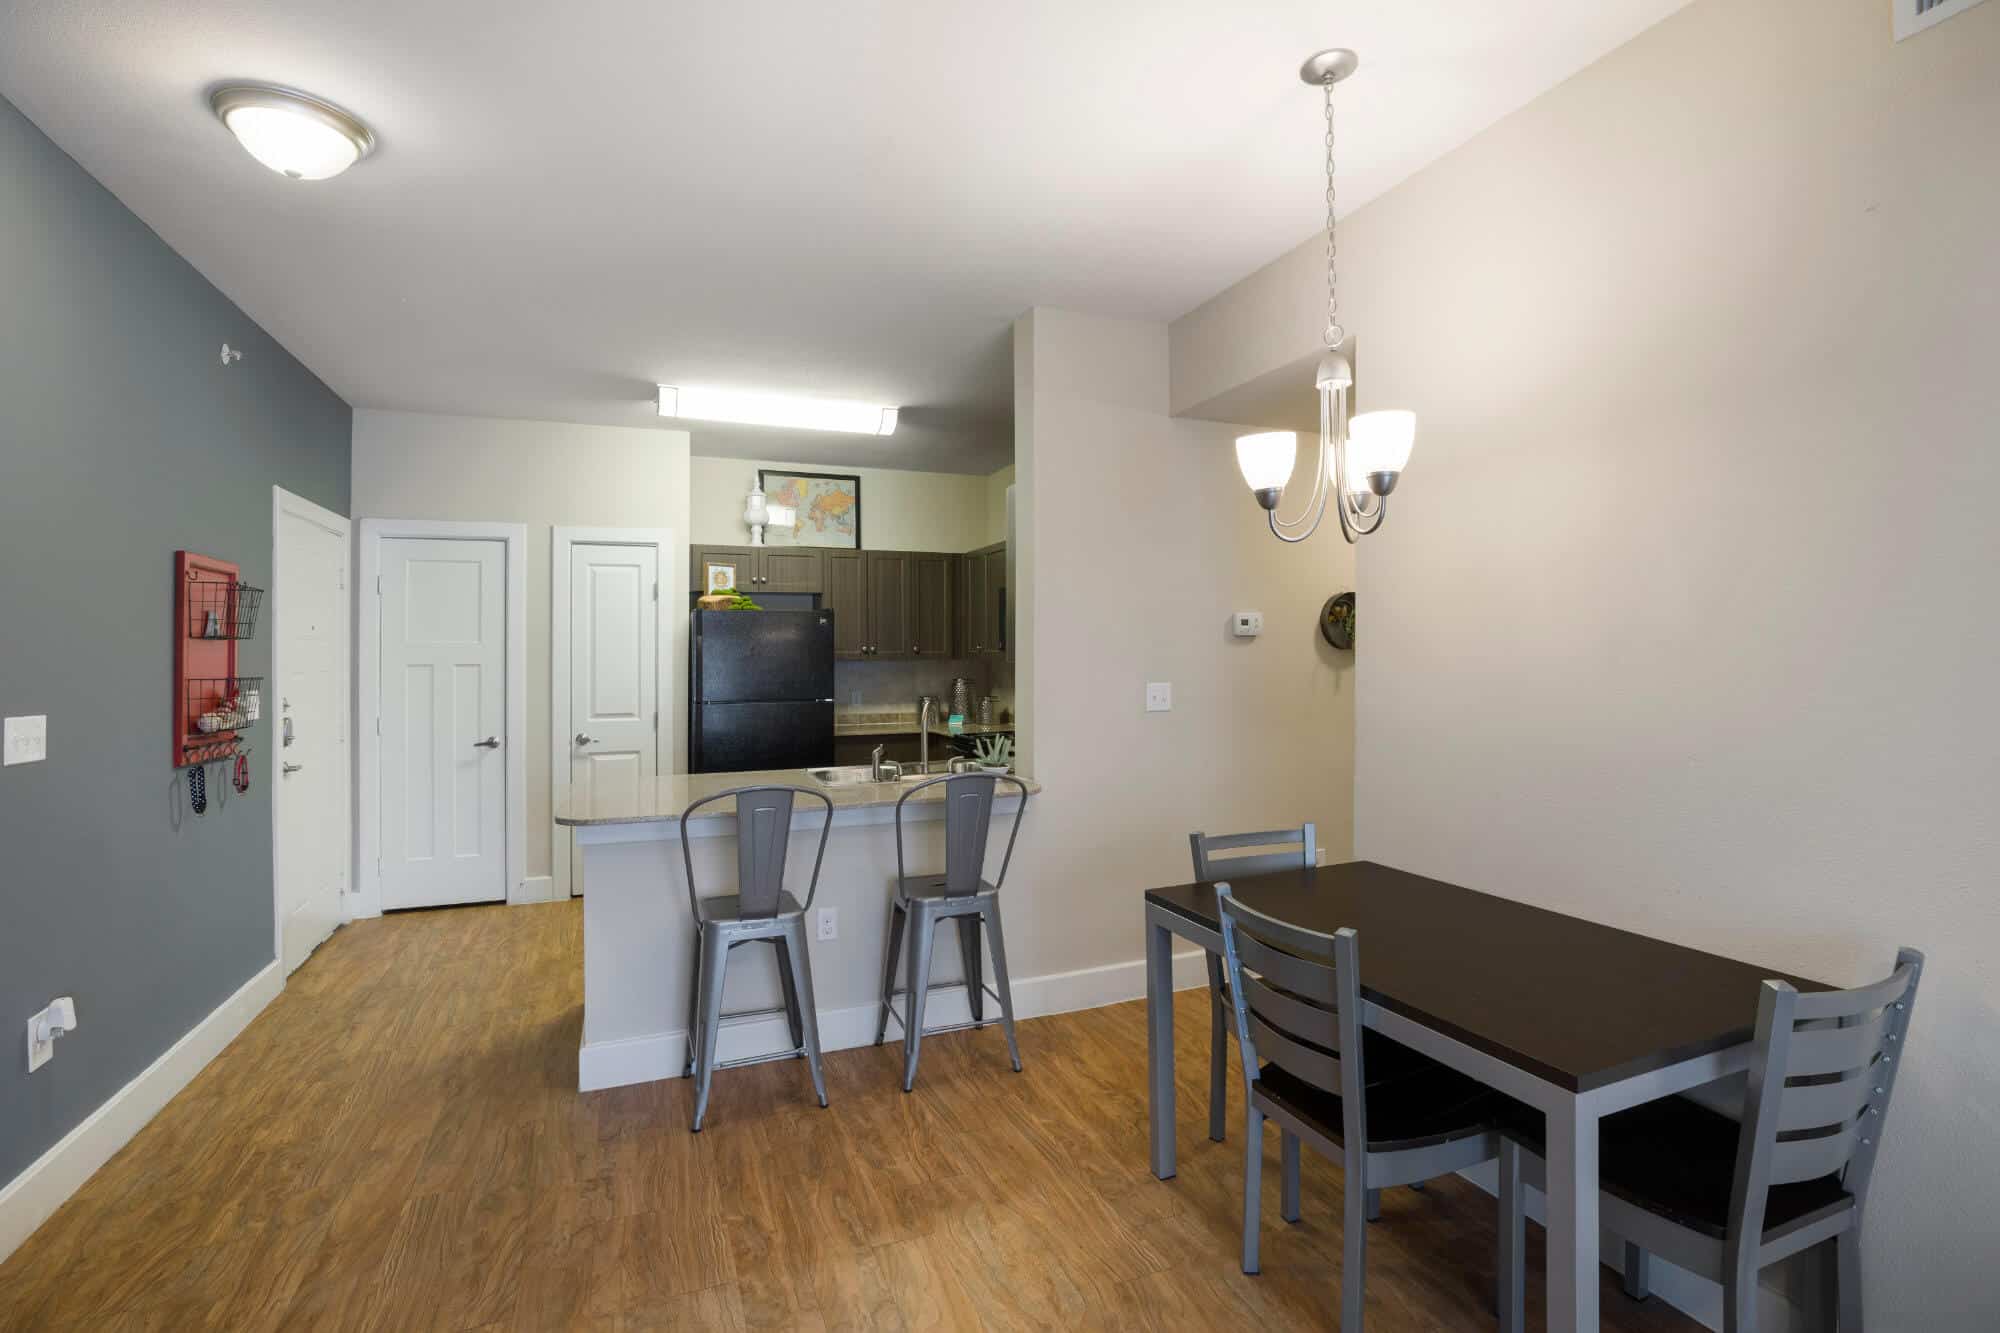 arba san marcos off campus apartments near texas state university open floor plan dining table kitchen with eat in bar and bar stool seating